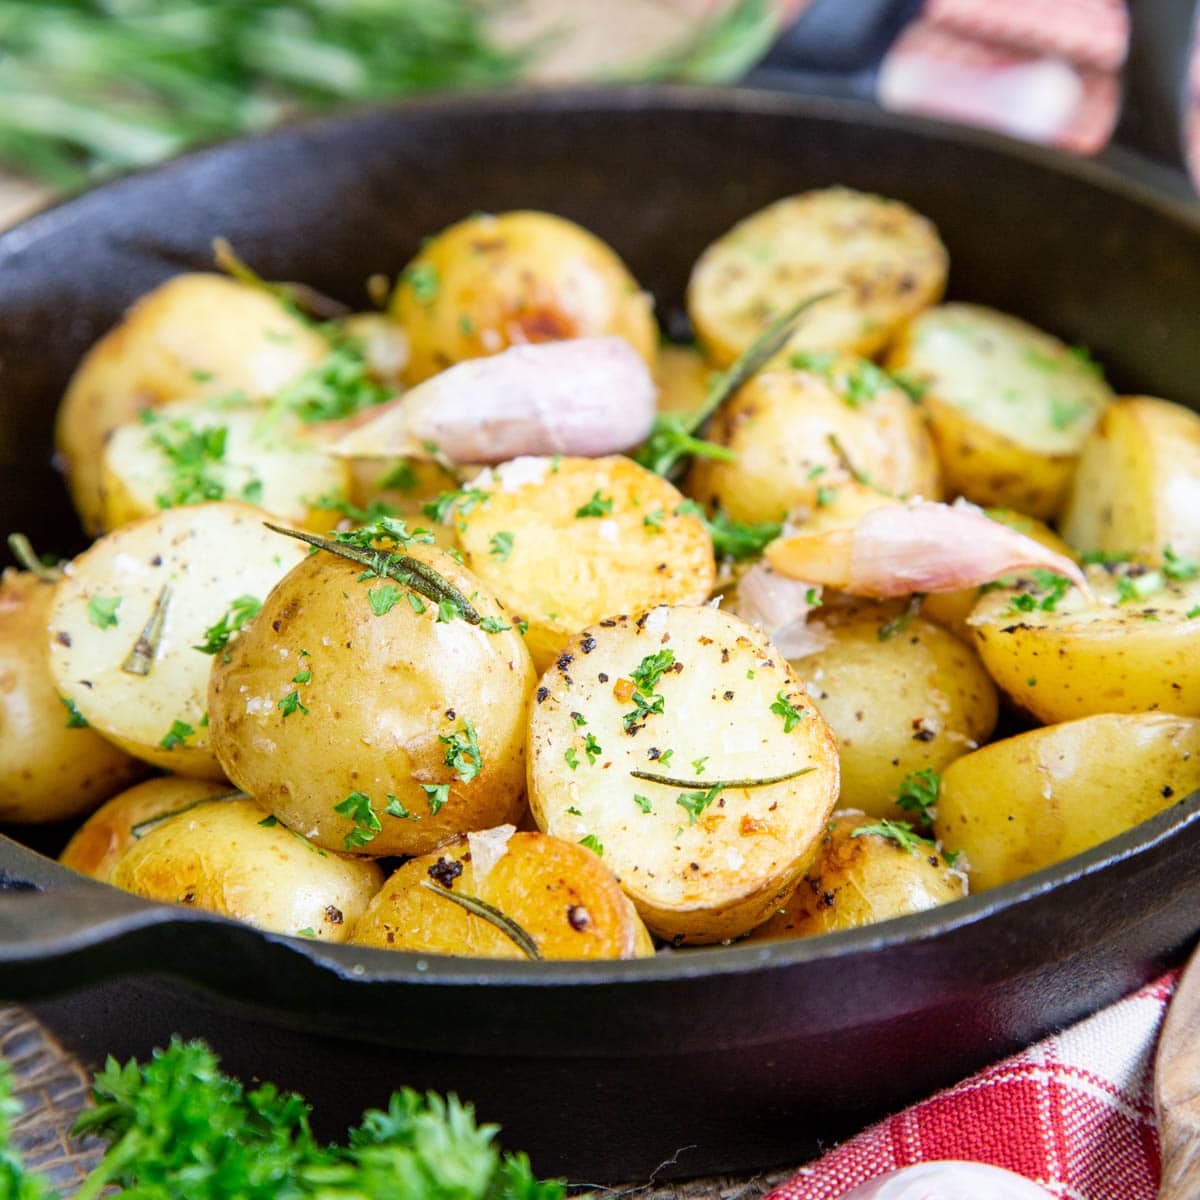 https://fussfreeflavours.com/wp-content/uploads/2021/01/baby-roasted-potatoes-featured.jpg